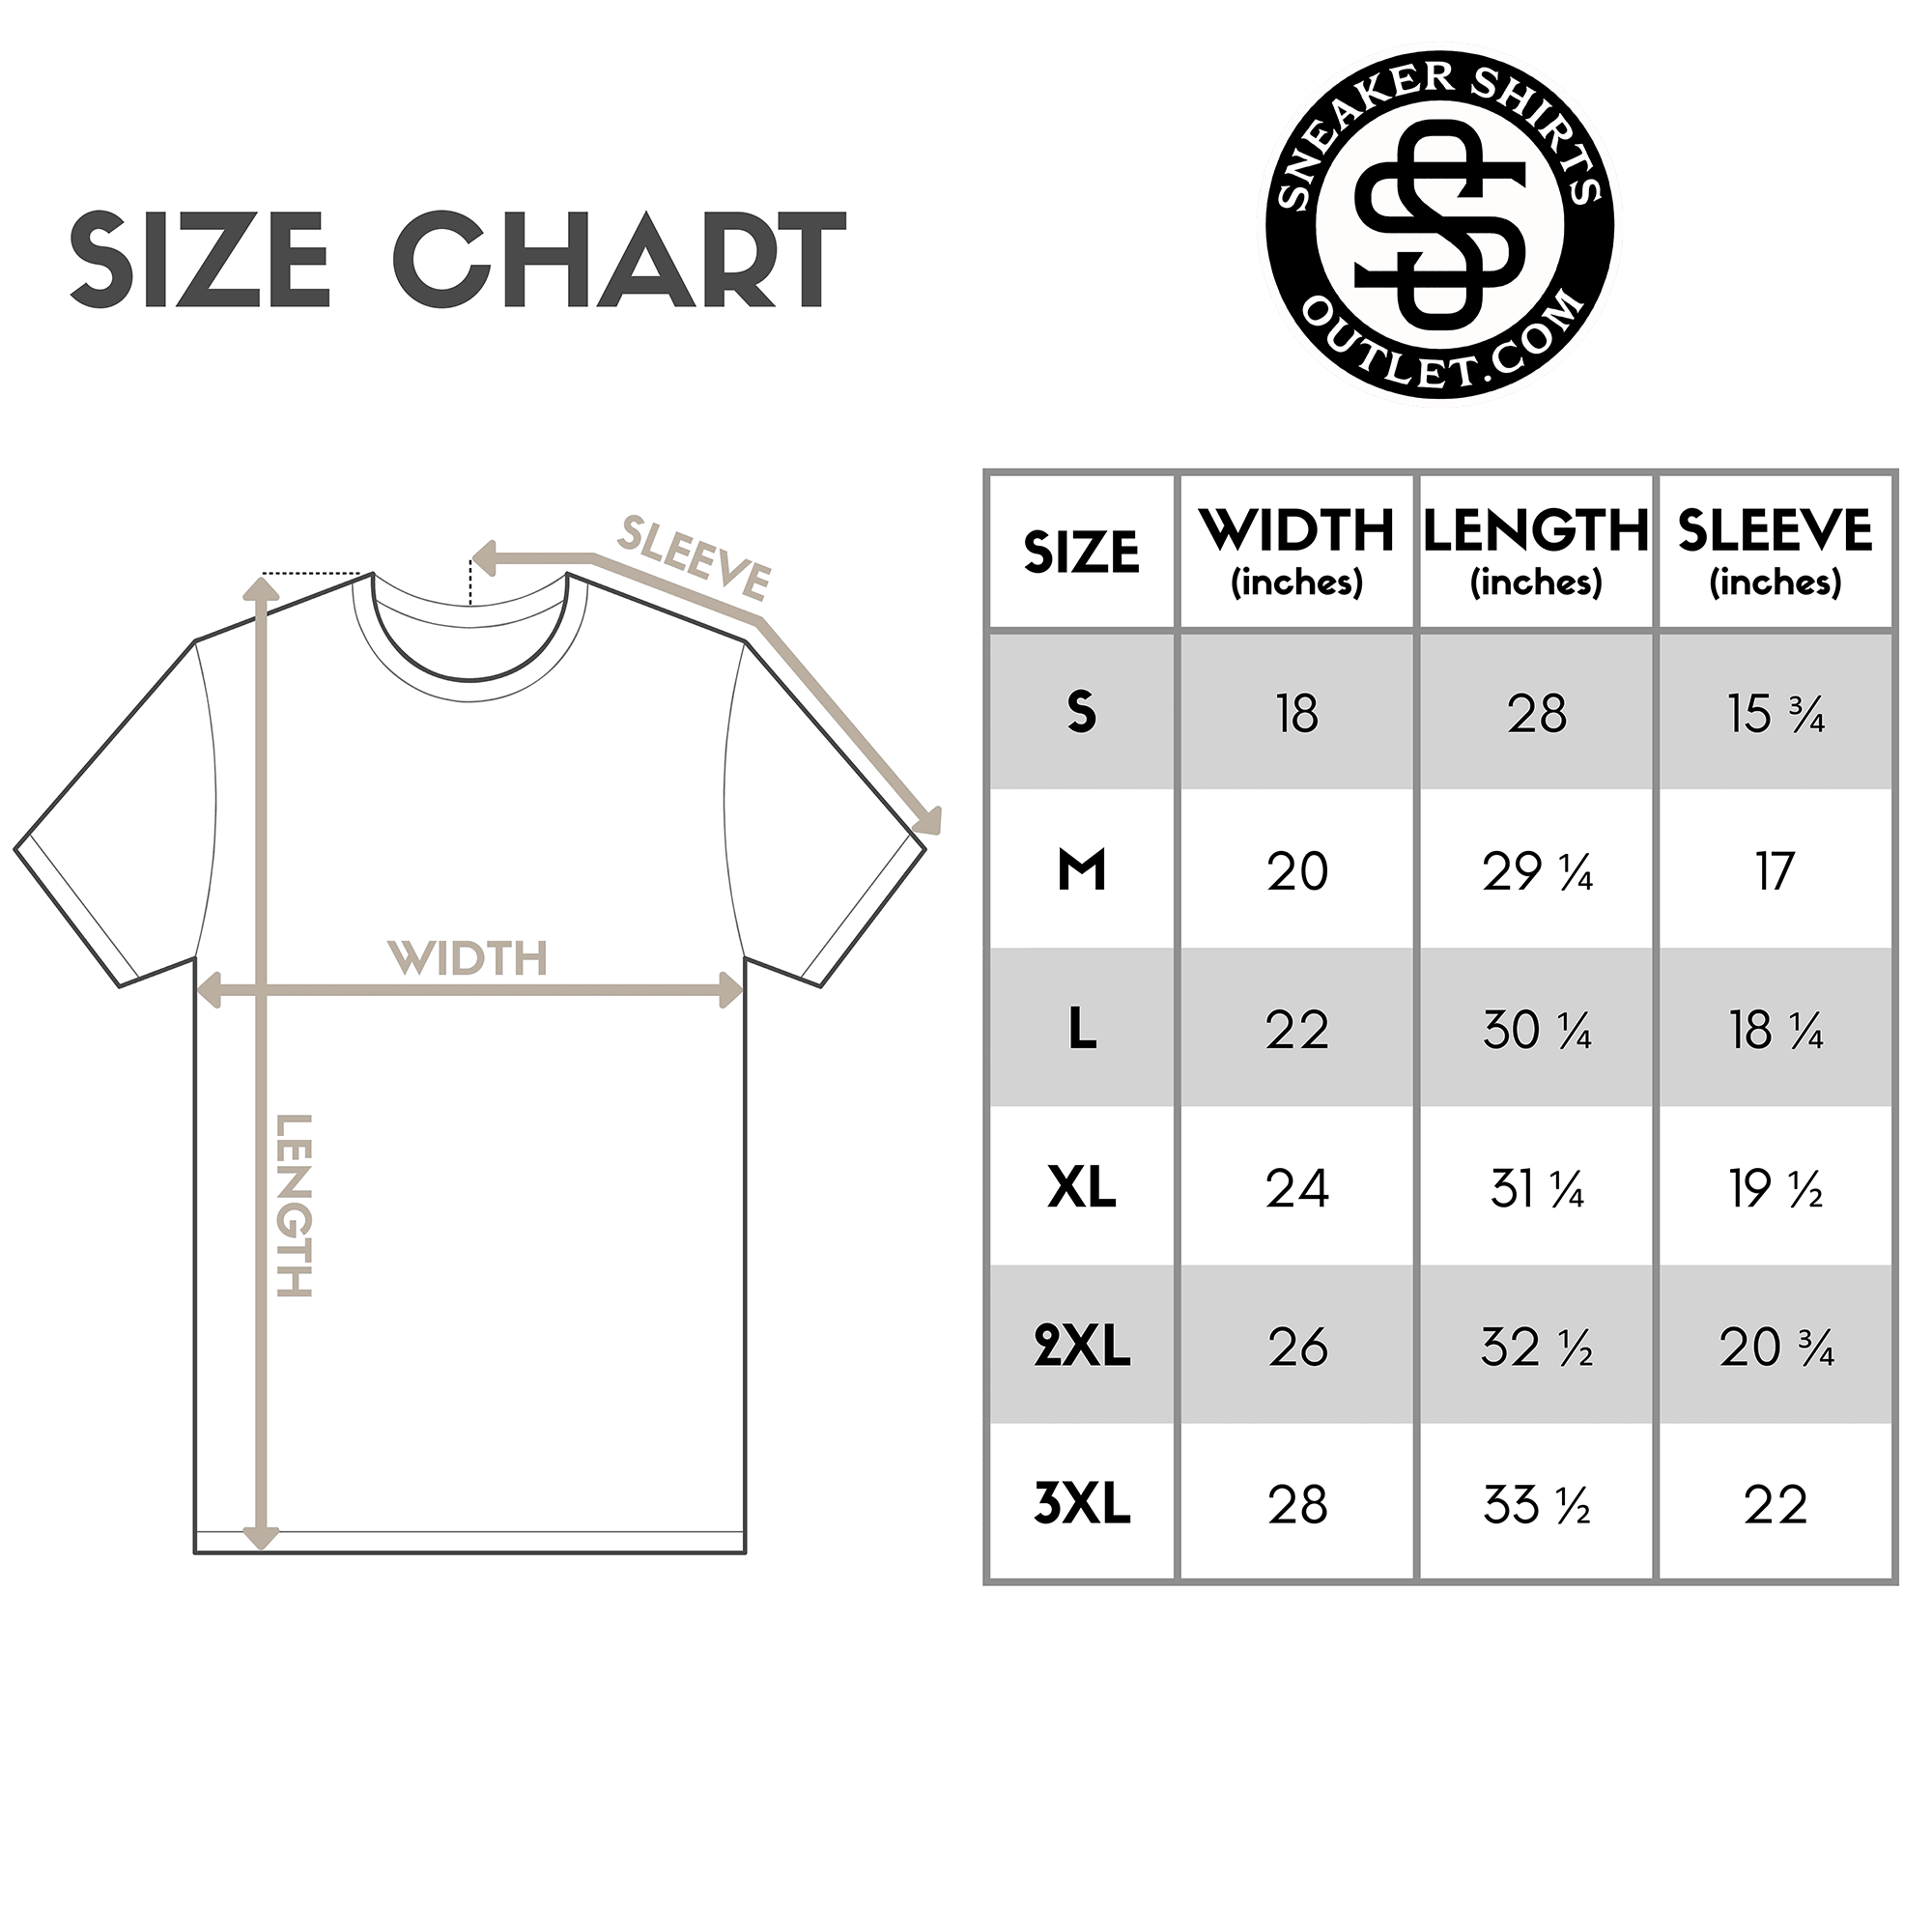 Sneaker Shirts Outlet Tee Size Chart